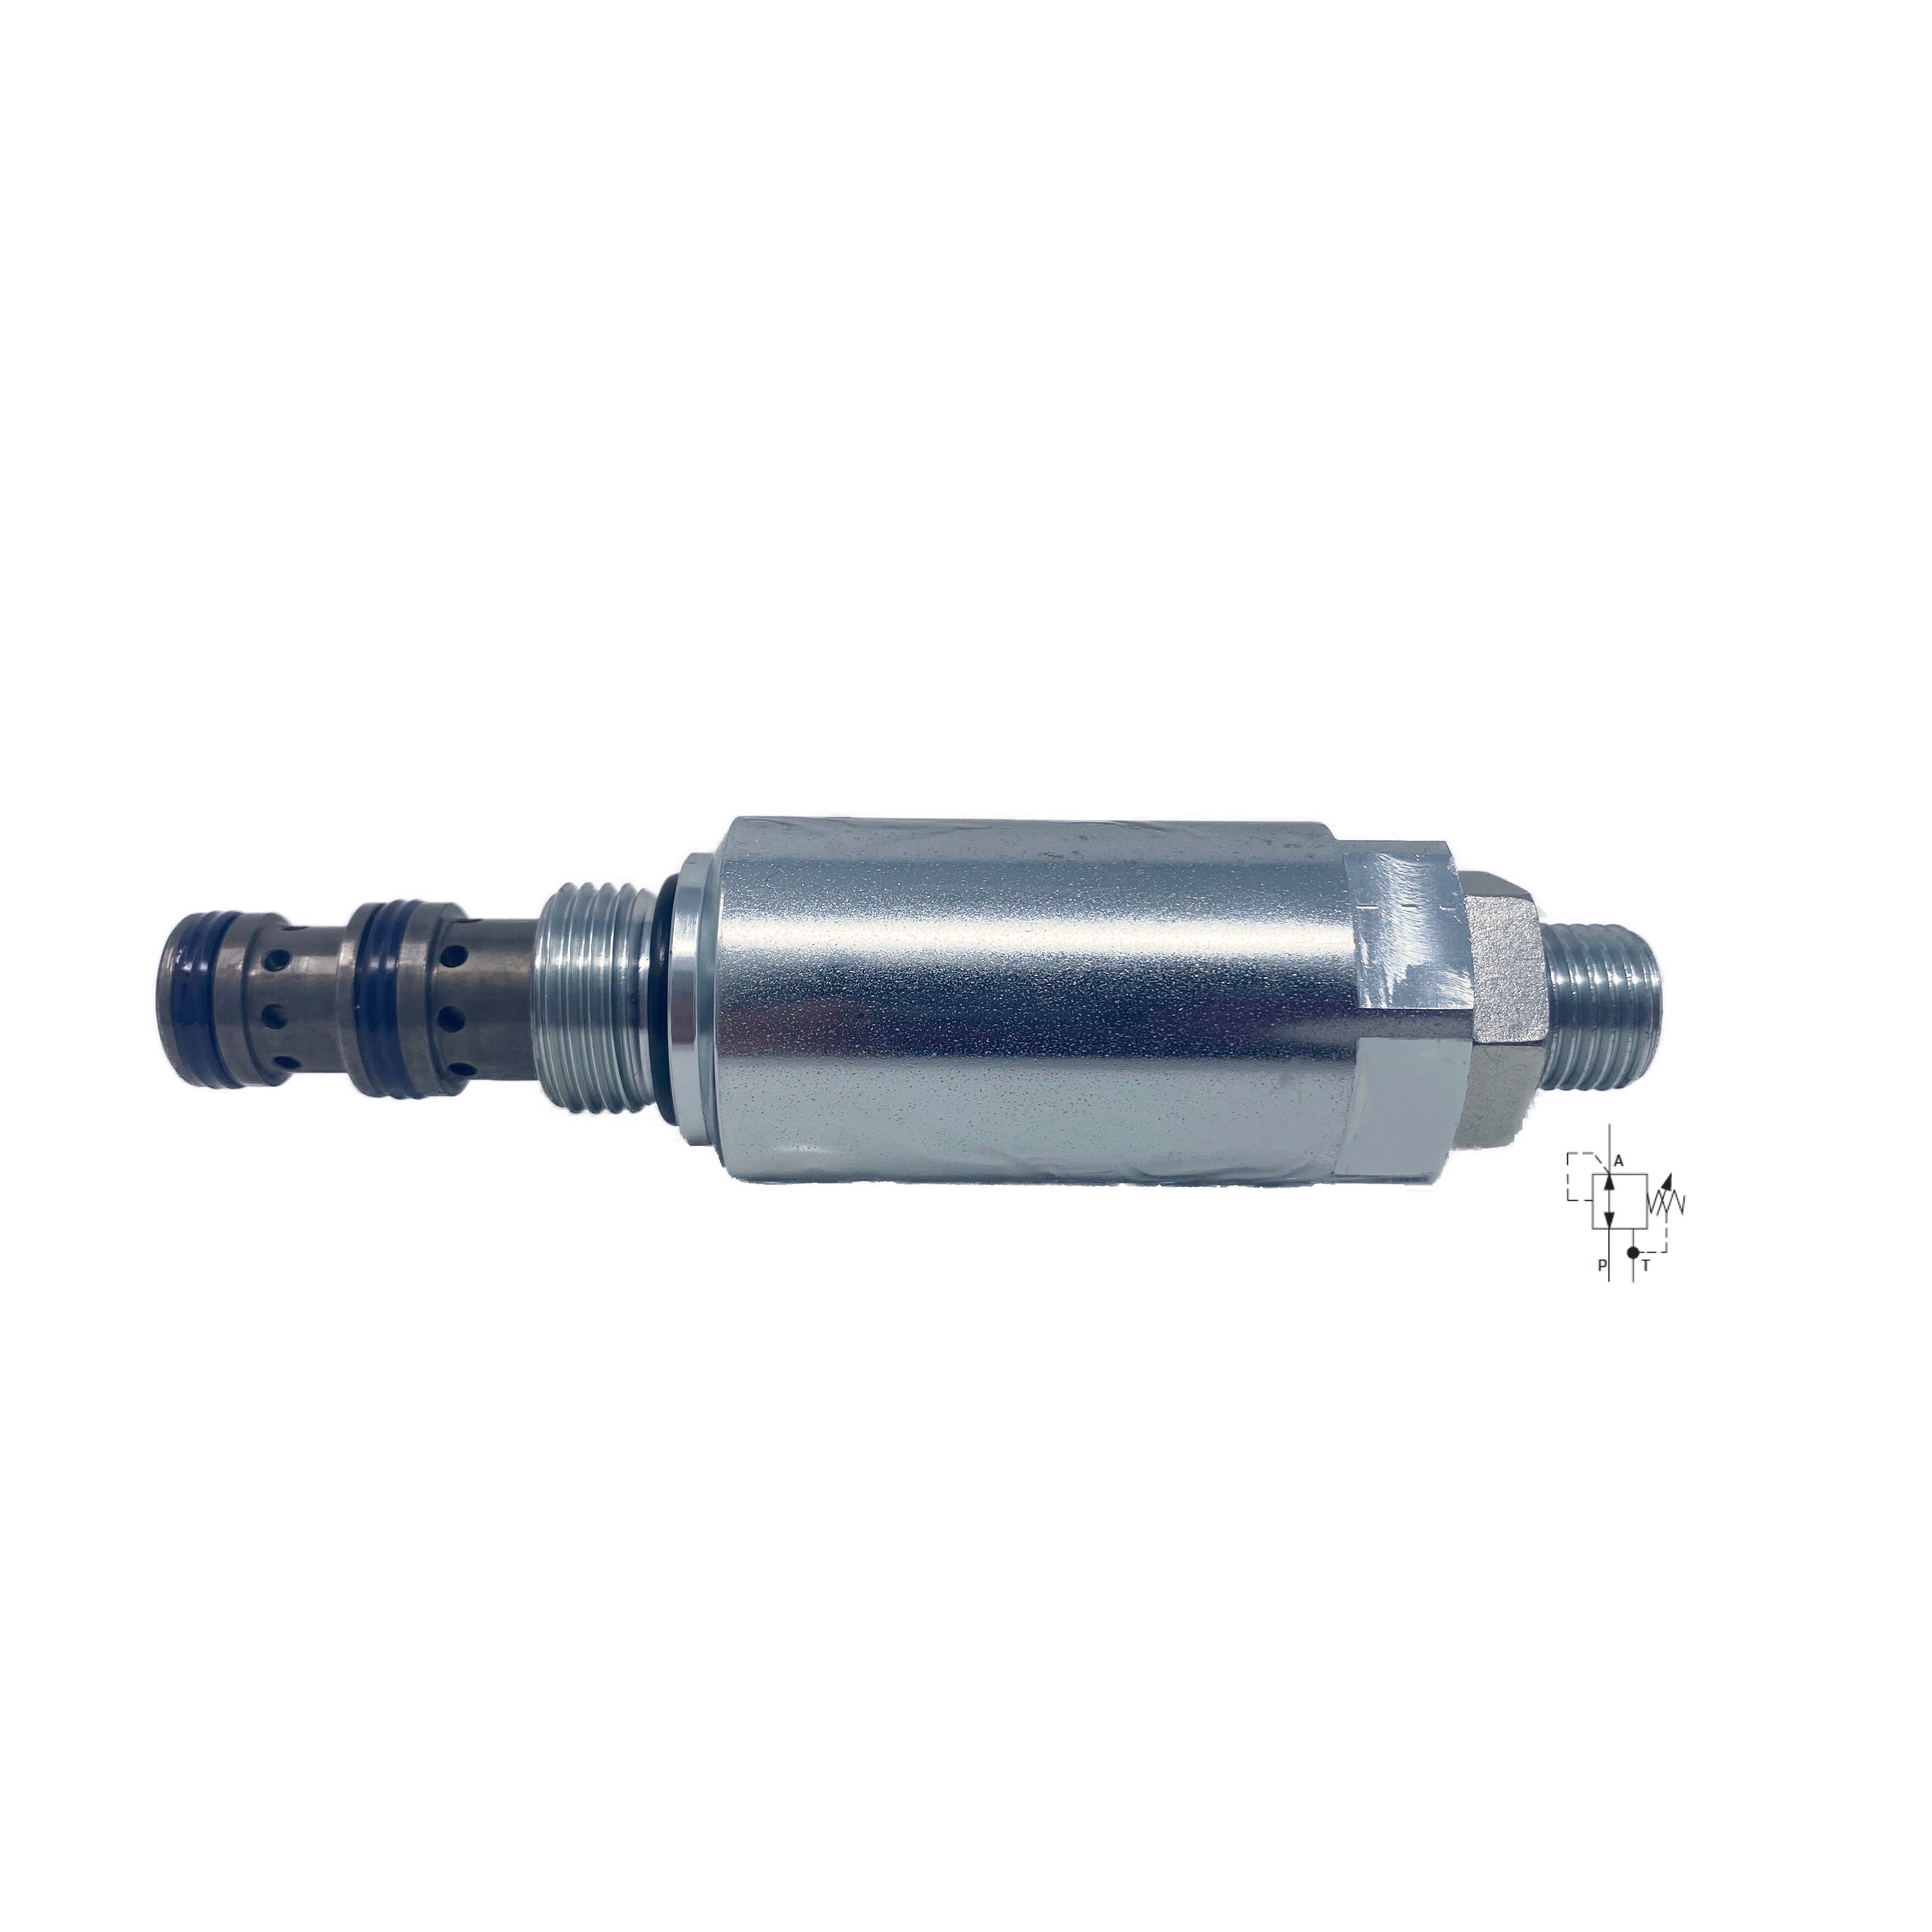 SP2A-A3/L2S : Argo, Pressure Reducing-Relieving Valve, Spool Type, Direct Acting, 5 GPM, 5100psi rated, 150-360psi Adjustable, C-8-3